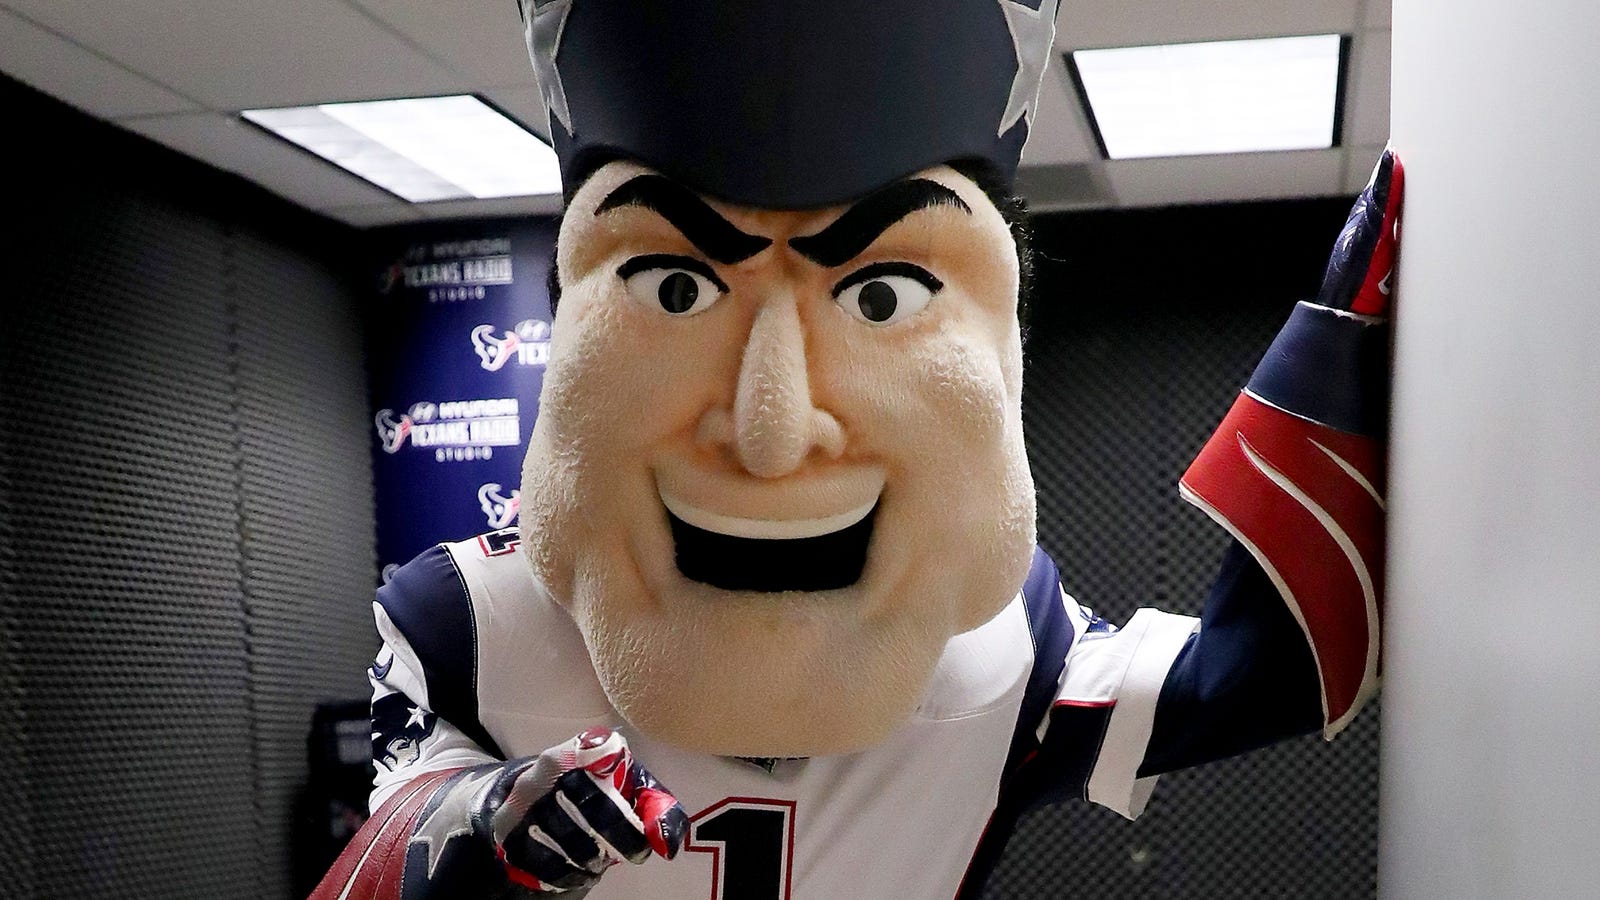 Pat Patriot Denies Being Mascot #5 In Prostitution Sting Police Report